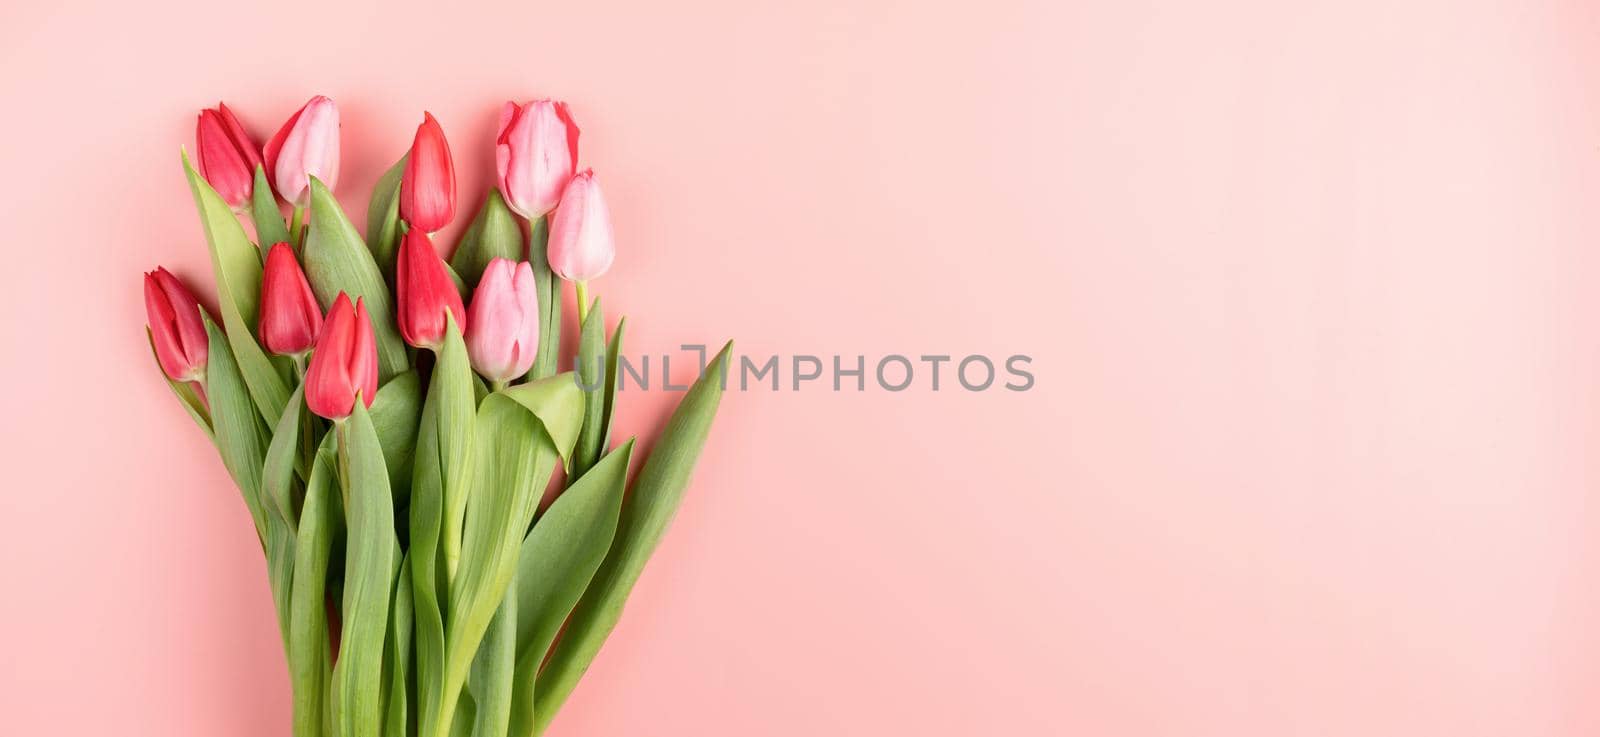 Red and pink tulips on pink solid background top view flat lay by Desperada